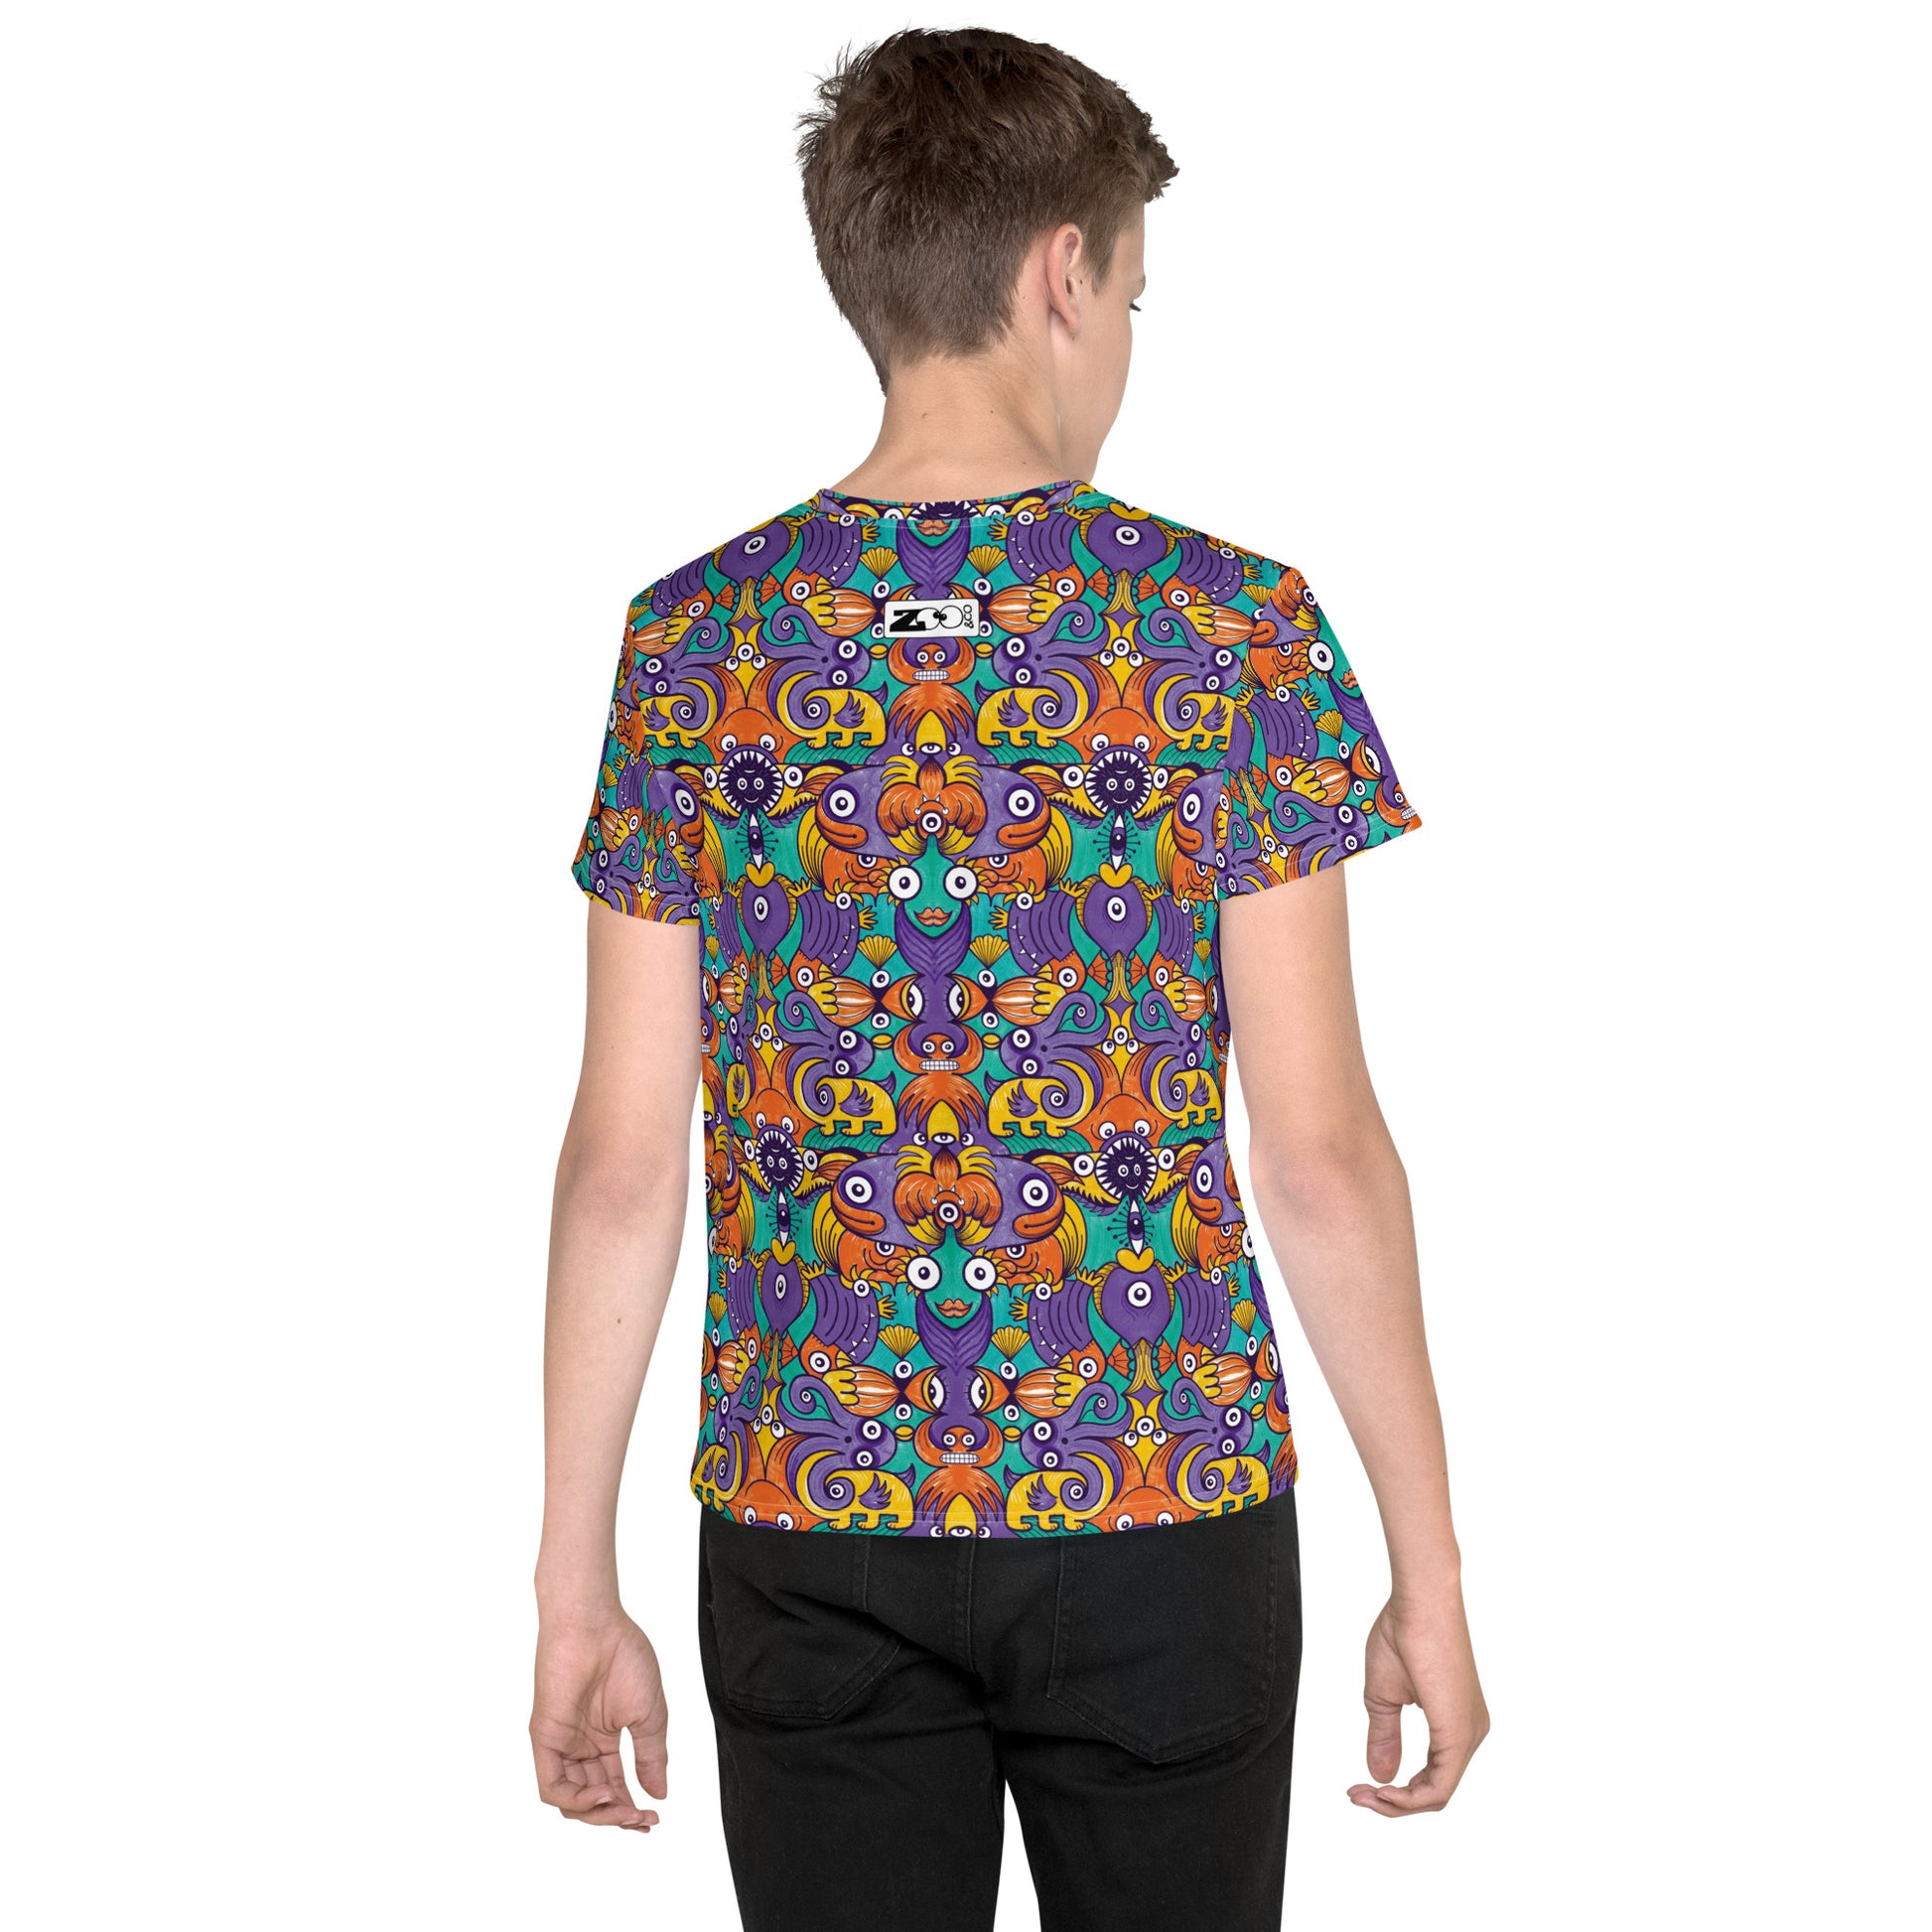 Dive into Whimsical Waters: An Undersea Odyssey - Youth crew neck t-shirt. Back view